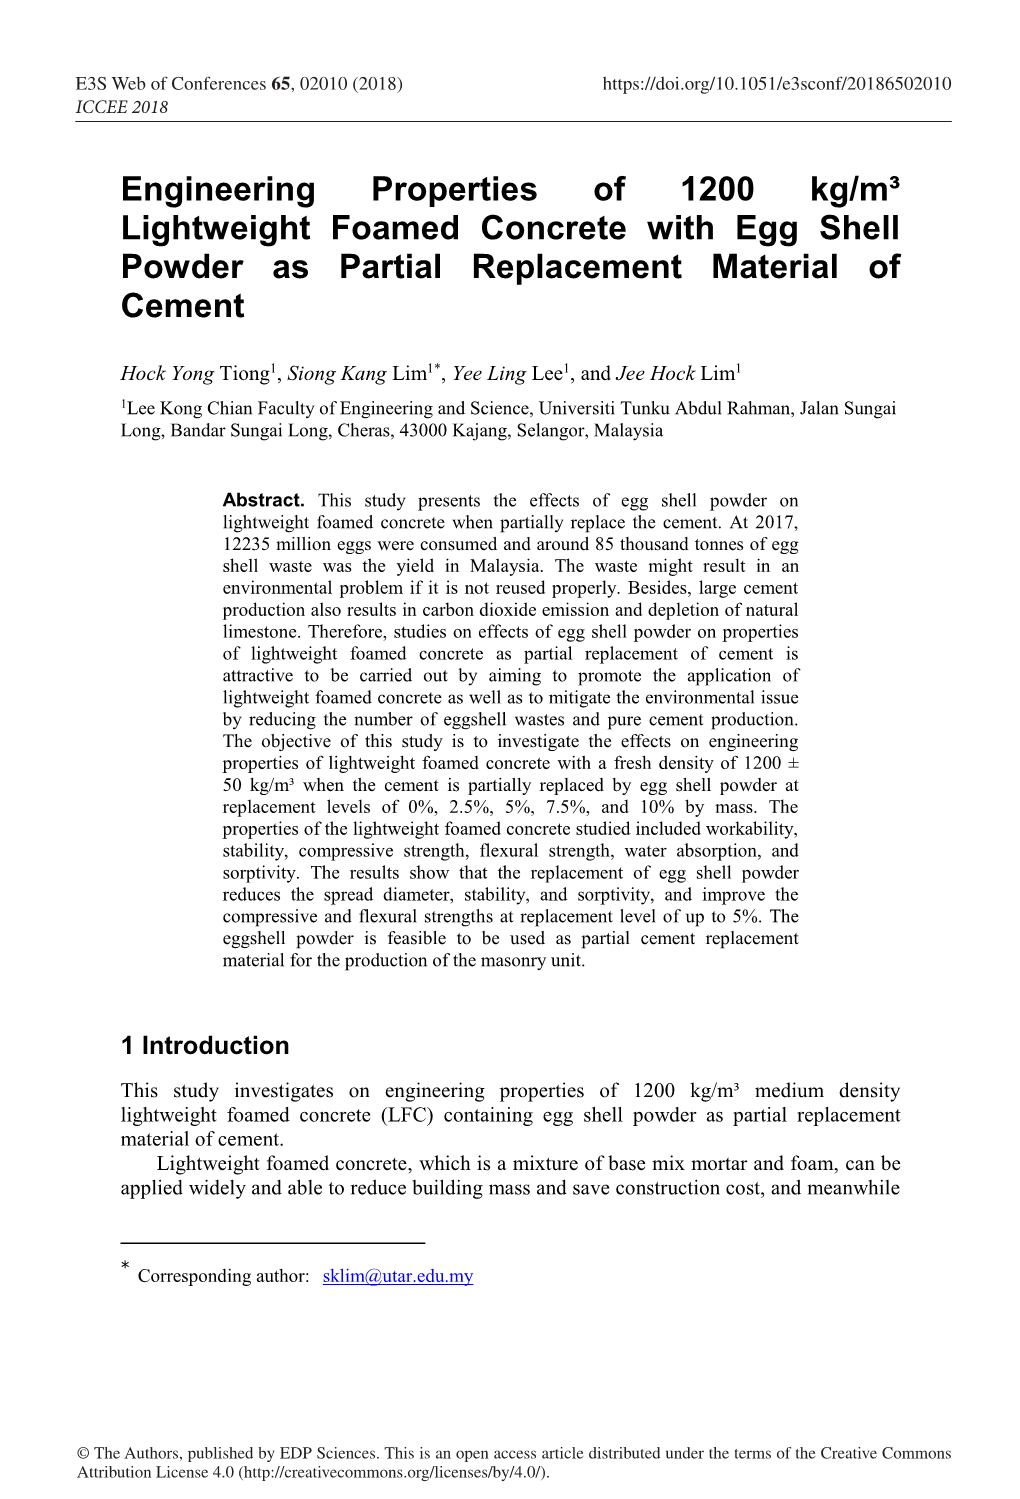 Engineering Properties of 1200 Kg/M³ Lightweight Foamed Concrete with Egg Shell Powder As Partial Replacement Material of Cement